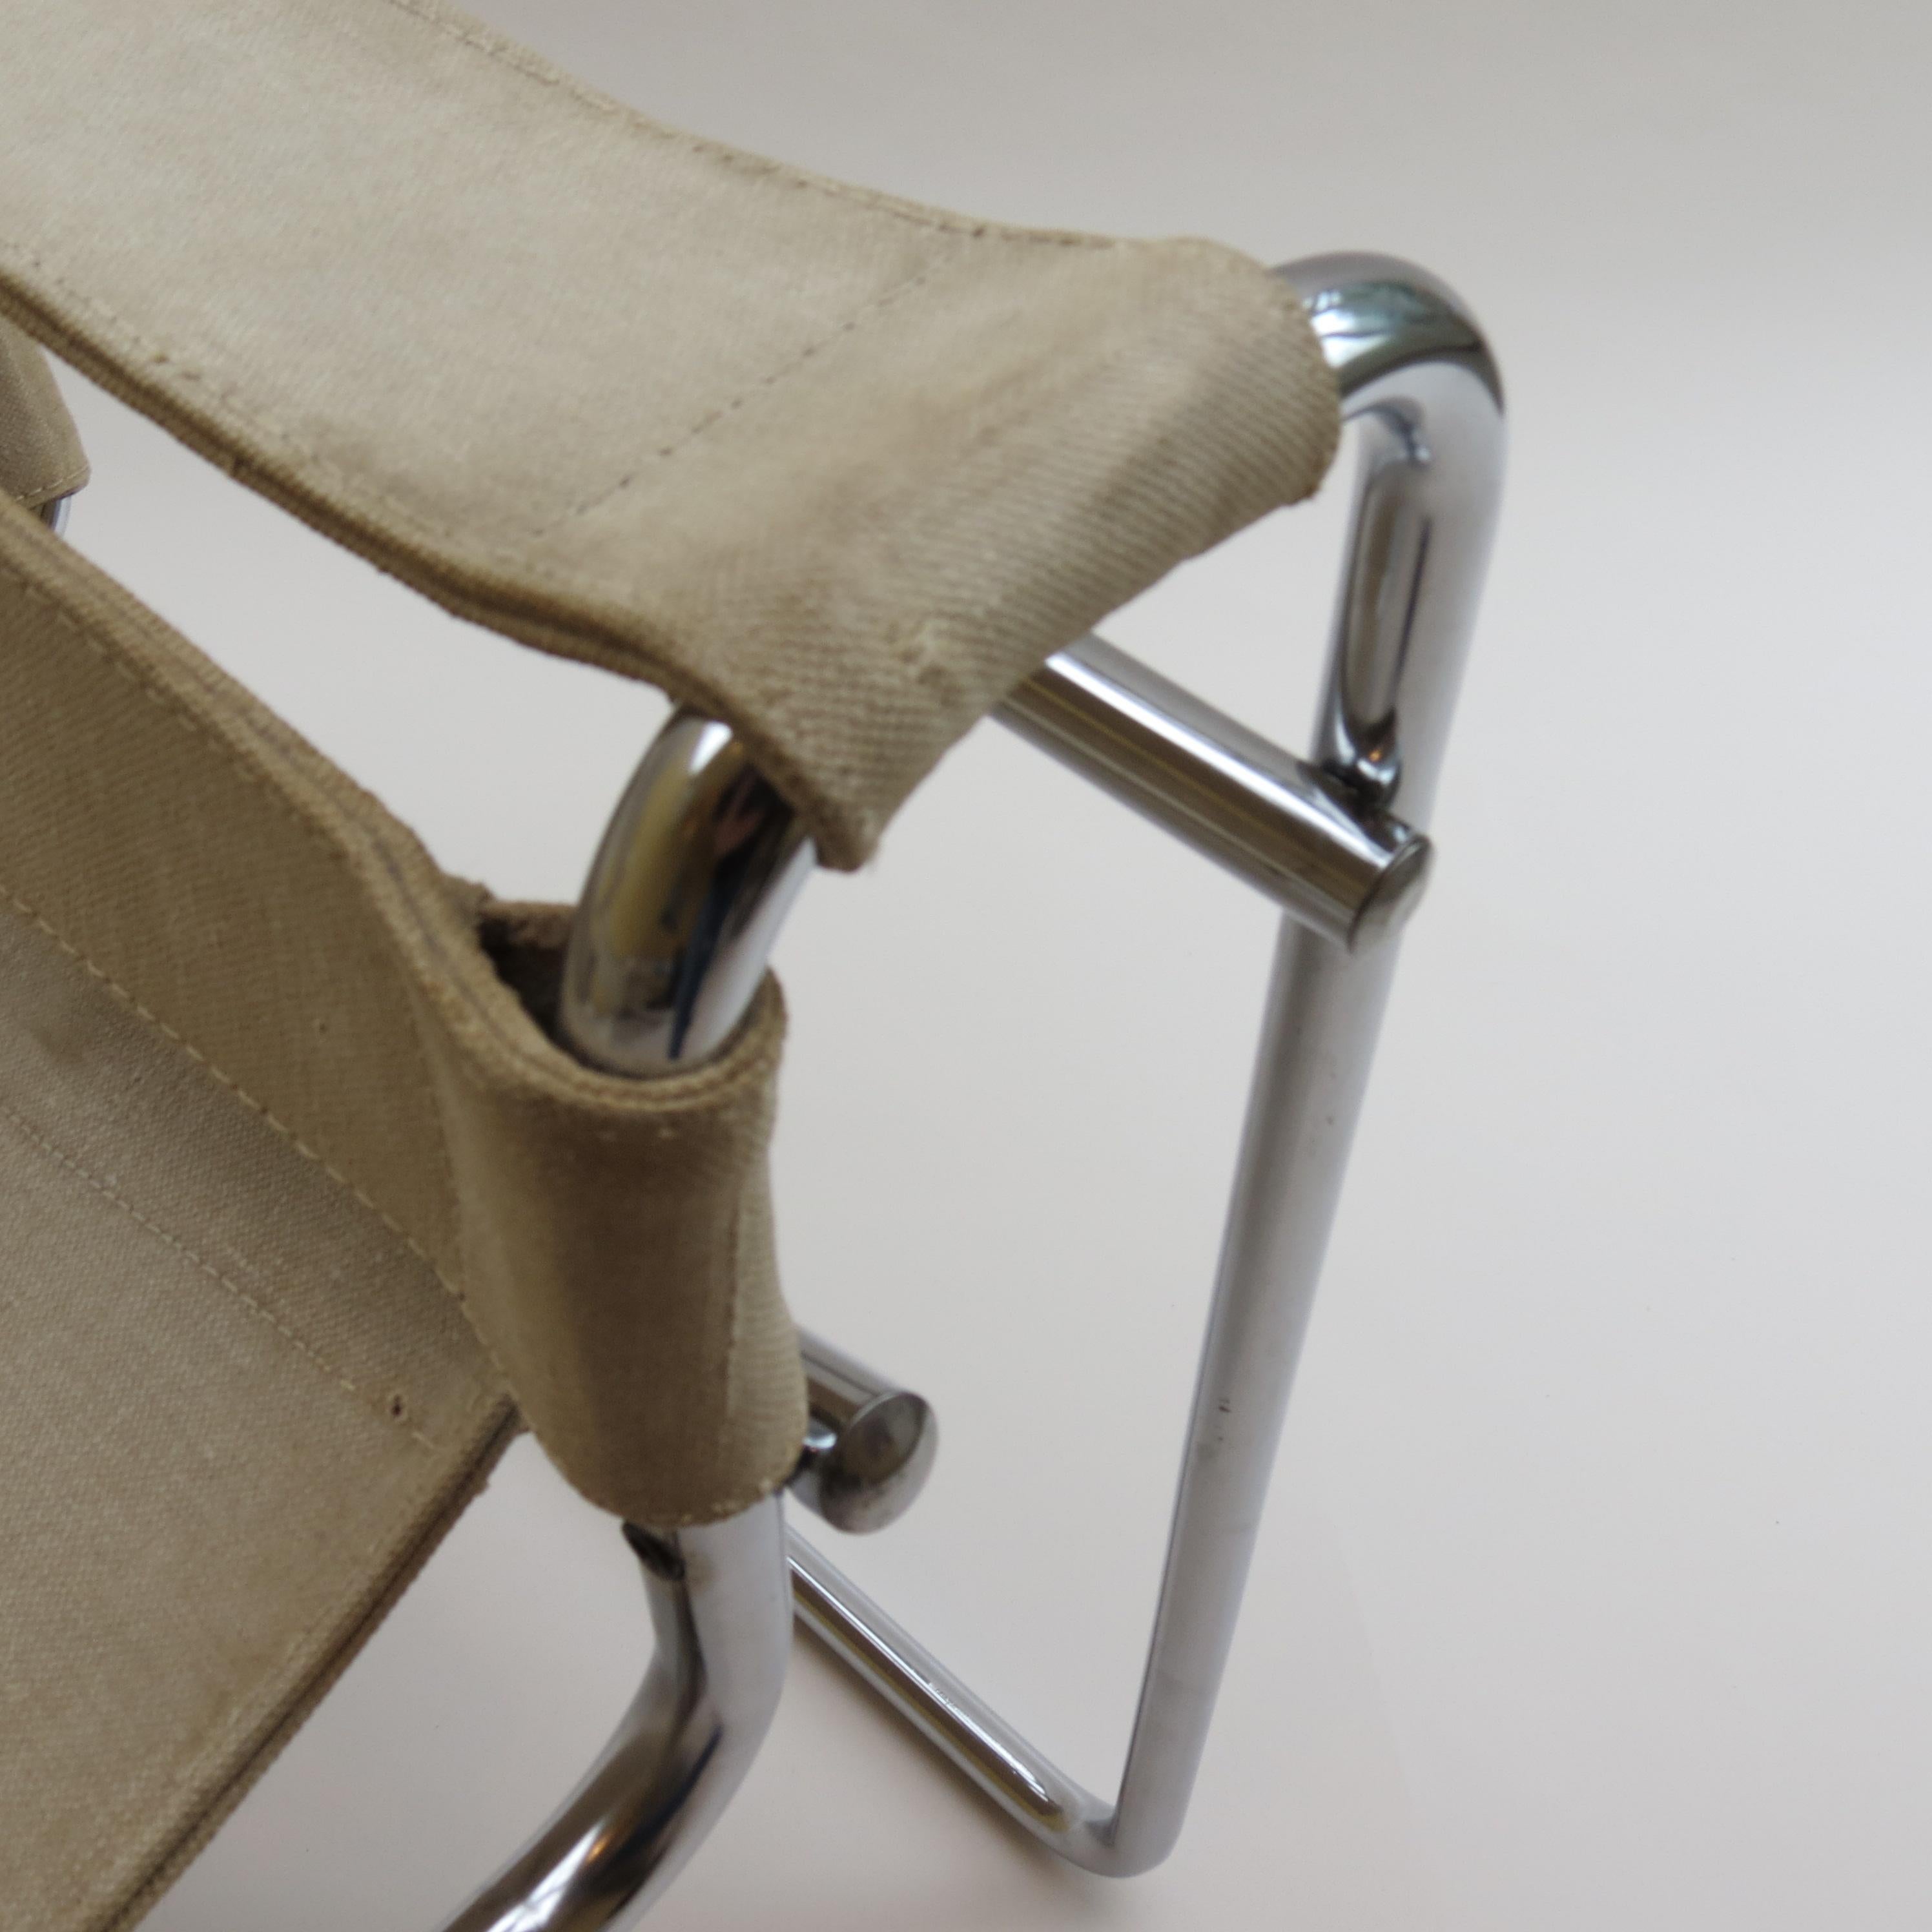 which existing product inspired marcel breuer’s armchair